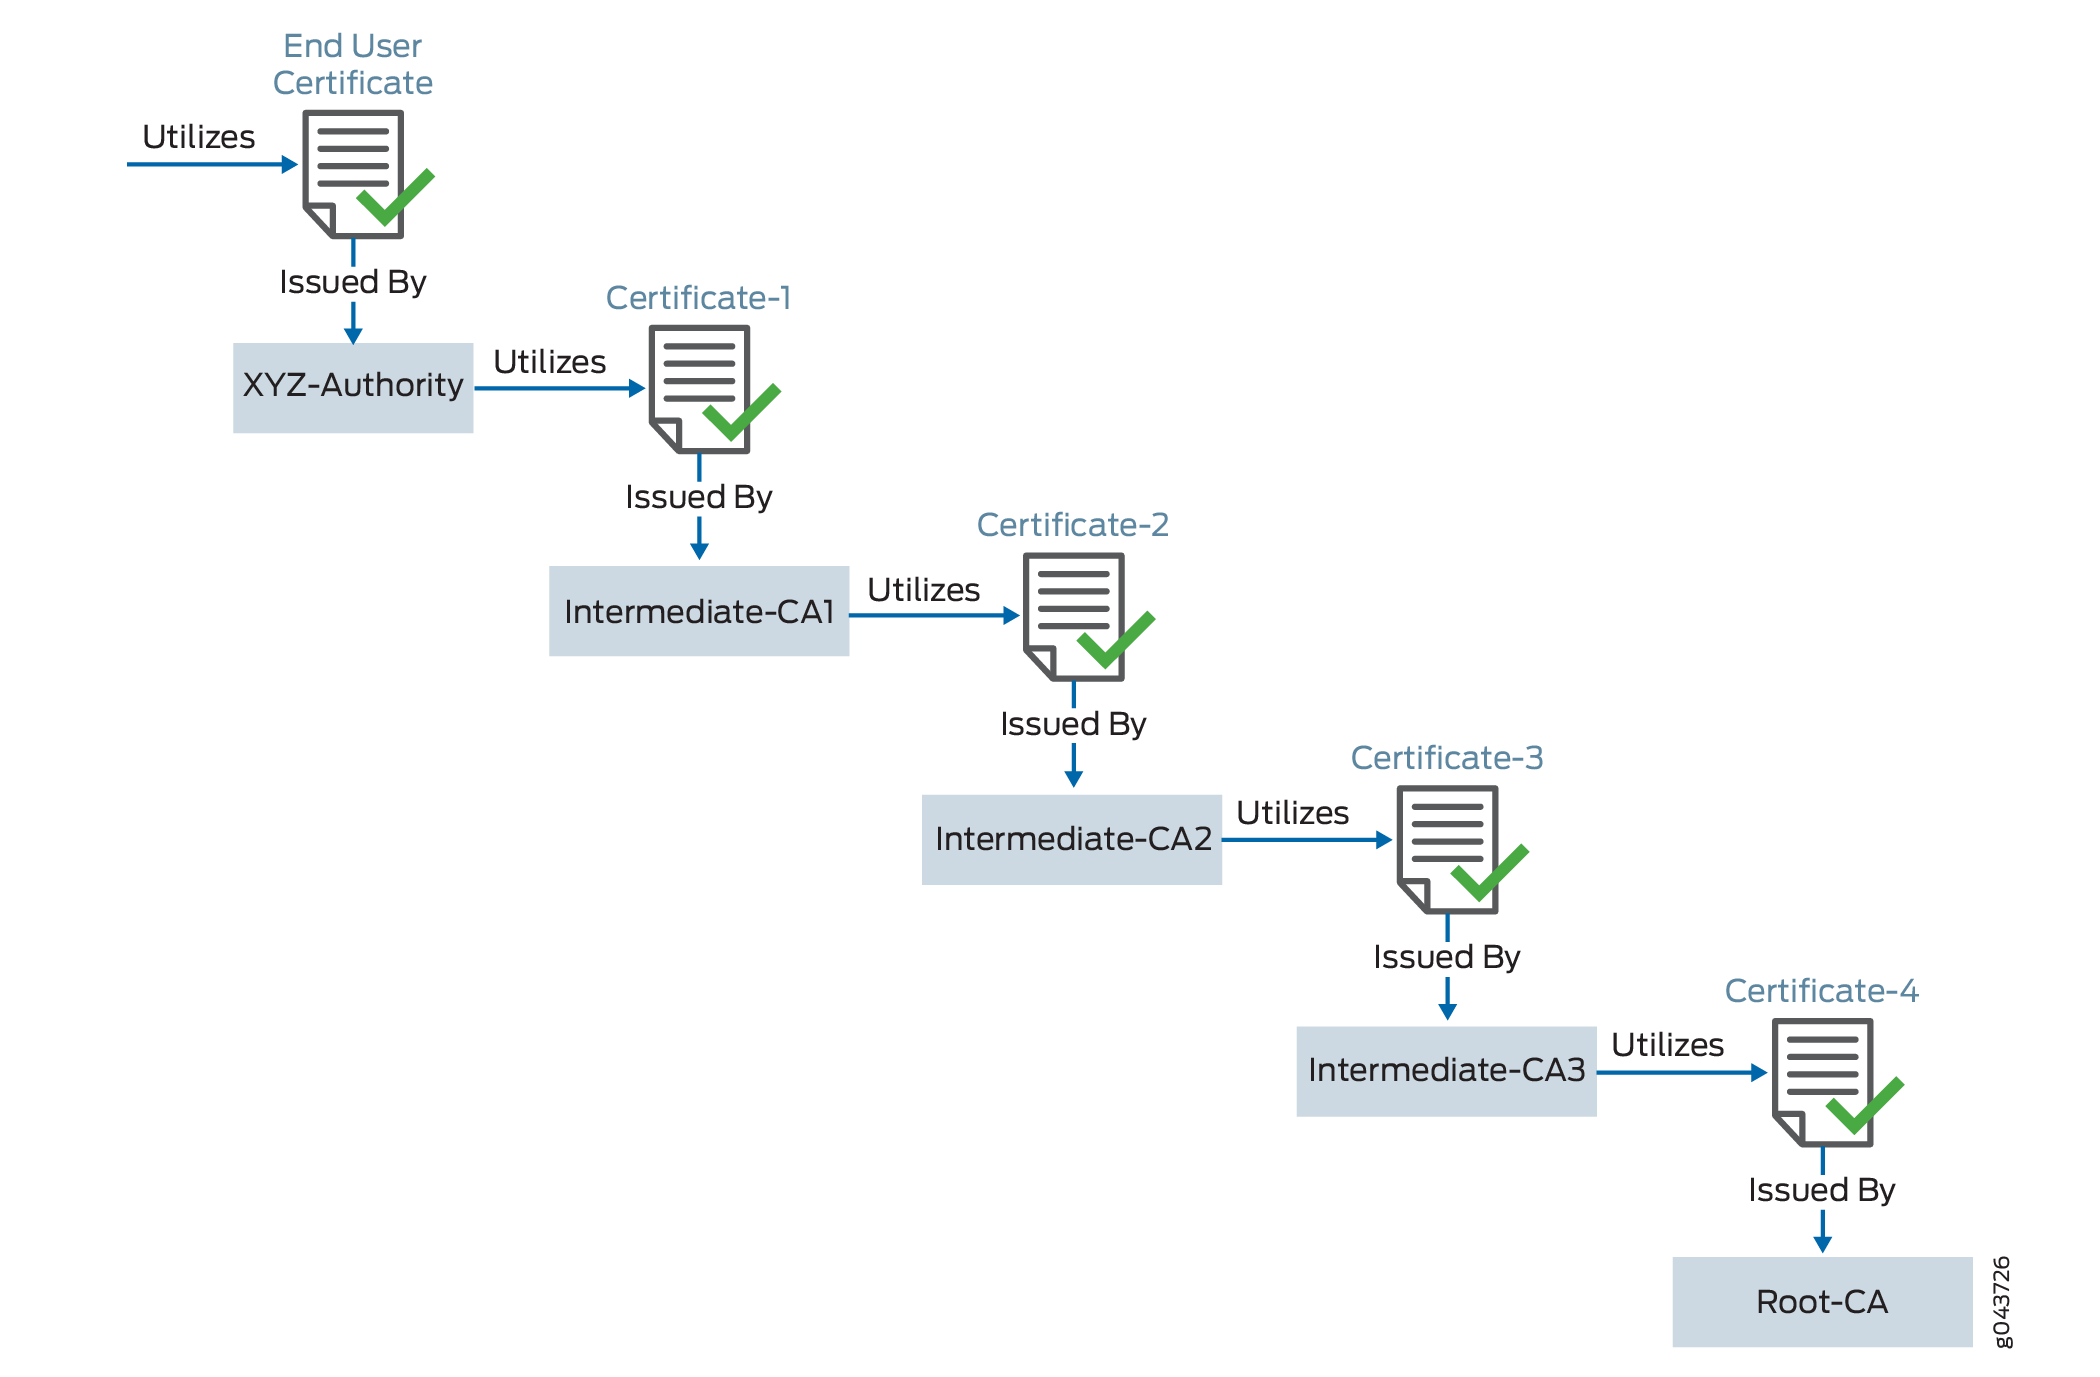 Certification Path from the Certificate Owner to the Root CA